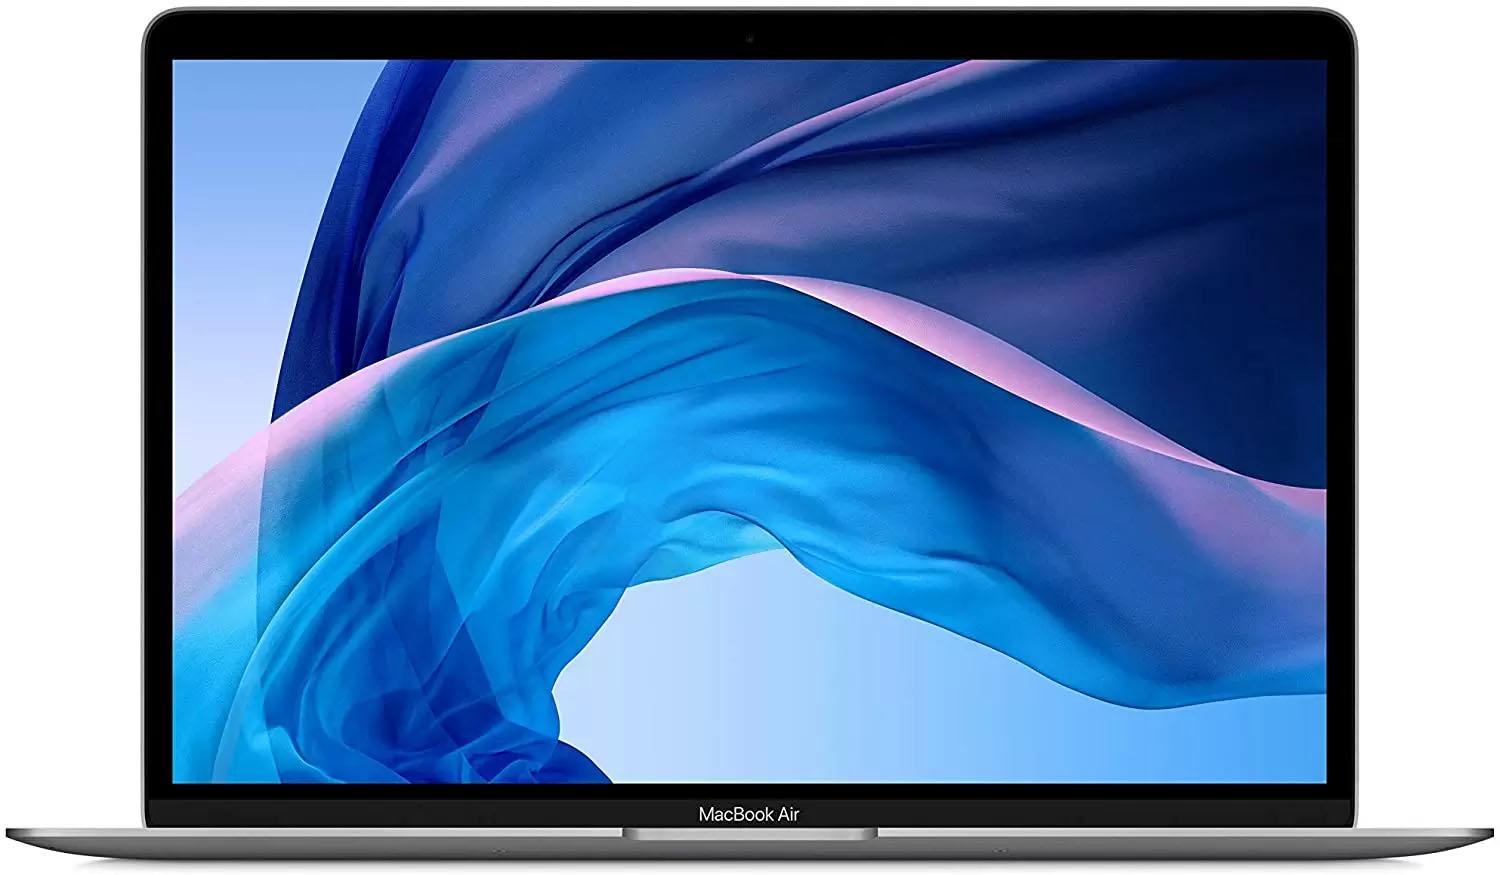 Apple MacBook Air 13in 8GB 256GB SSD Notebook Laptop for $879 Shipped